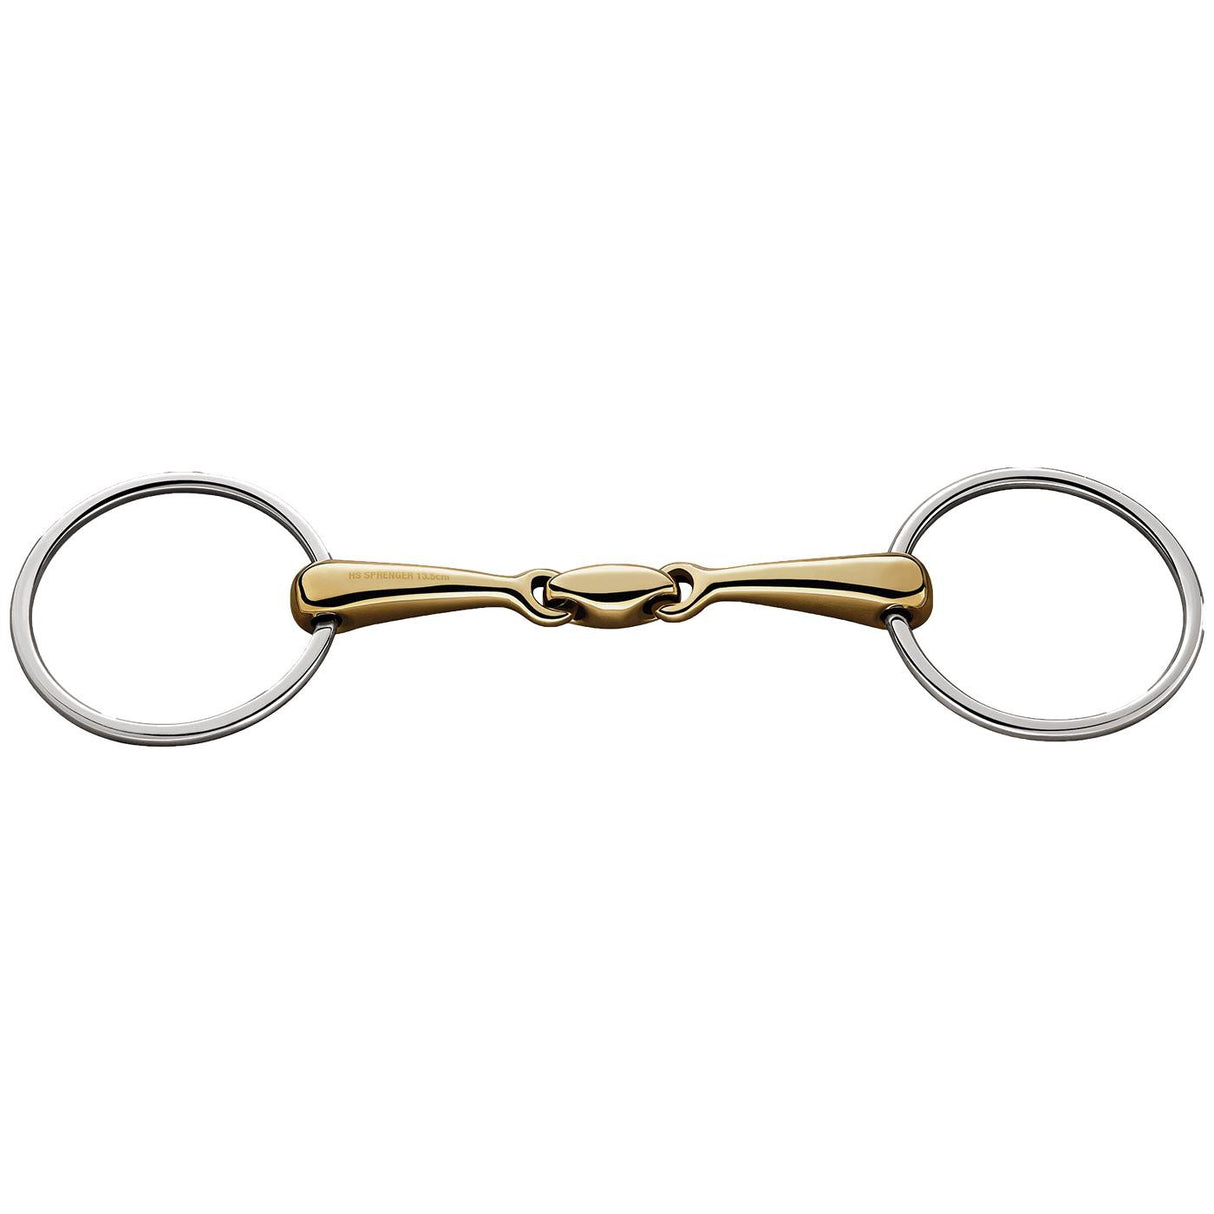 Sprenger CU Plus Loose Ring Double Jointed Snaffle Bit - 18 mm